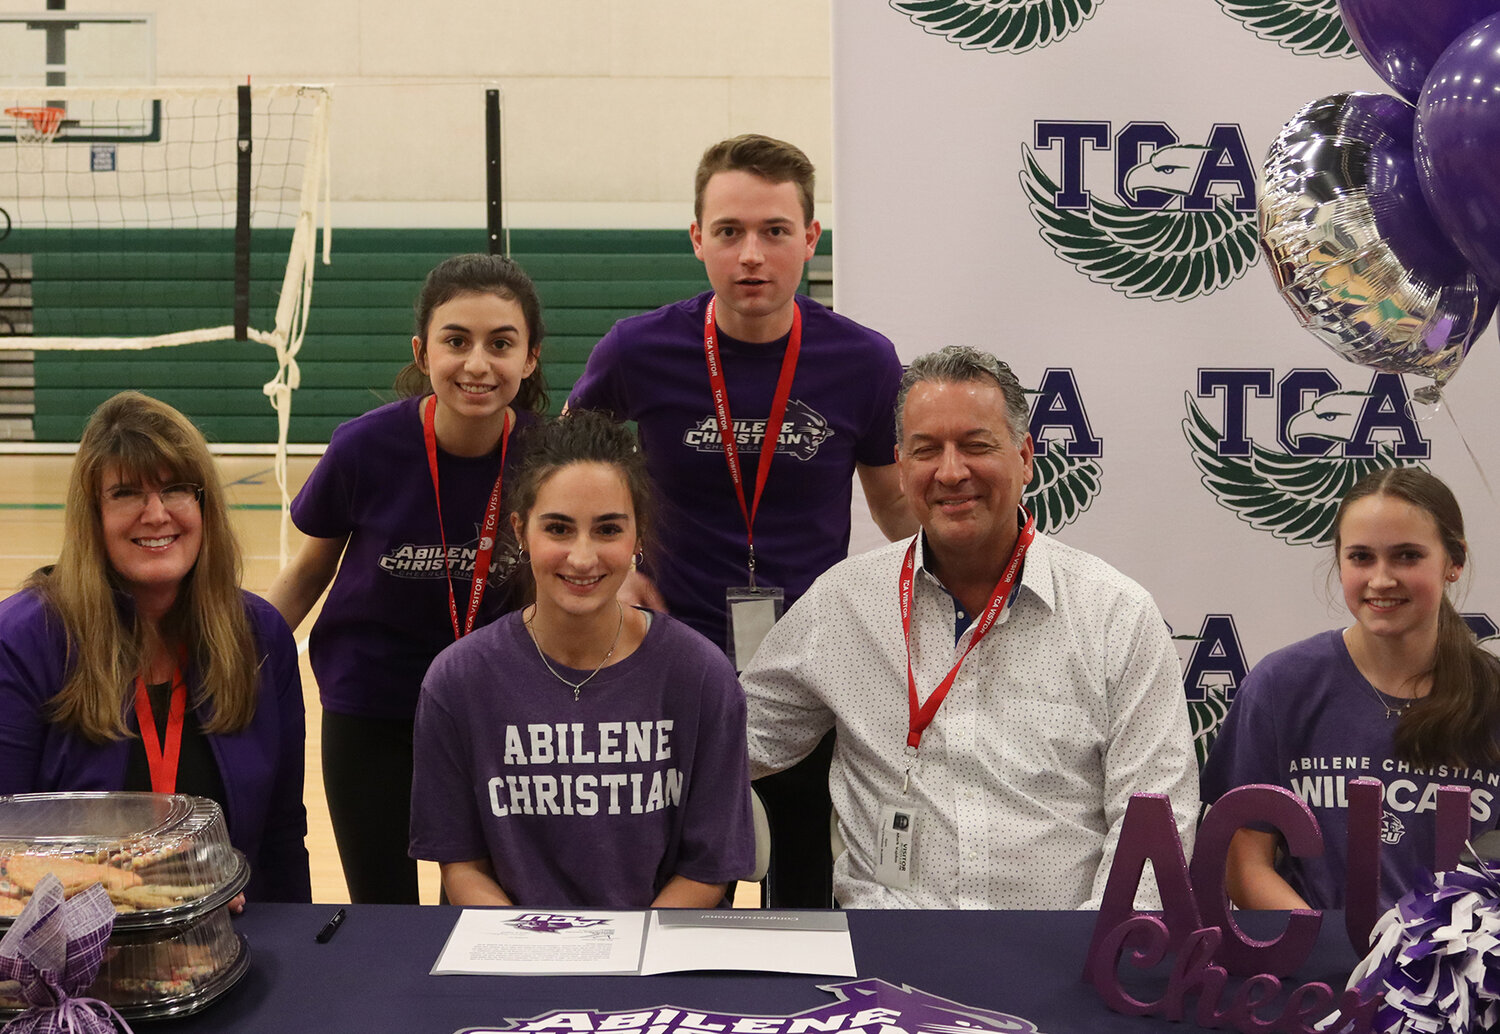 Olivia Vajdos, surrounded by family, signed to be on the cheer squad at Abilene Christian University.